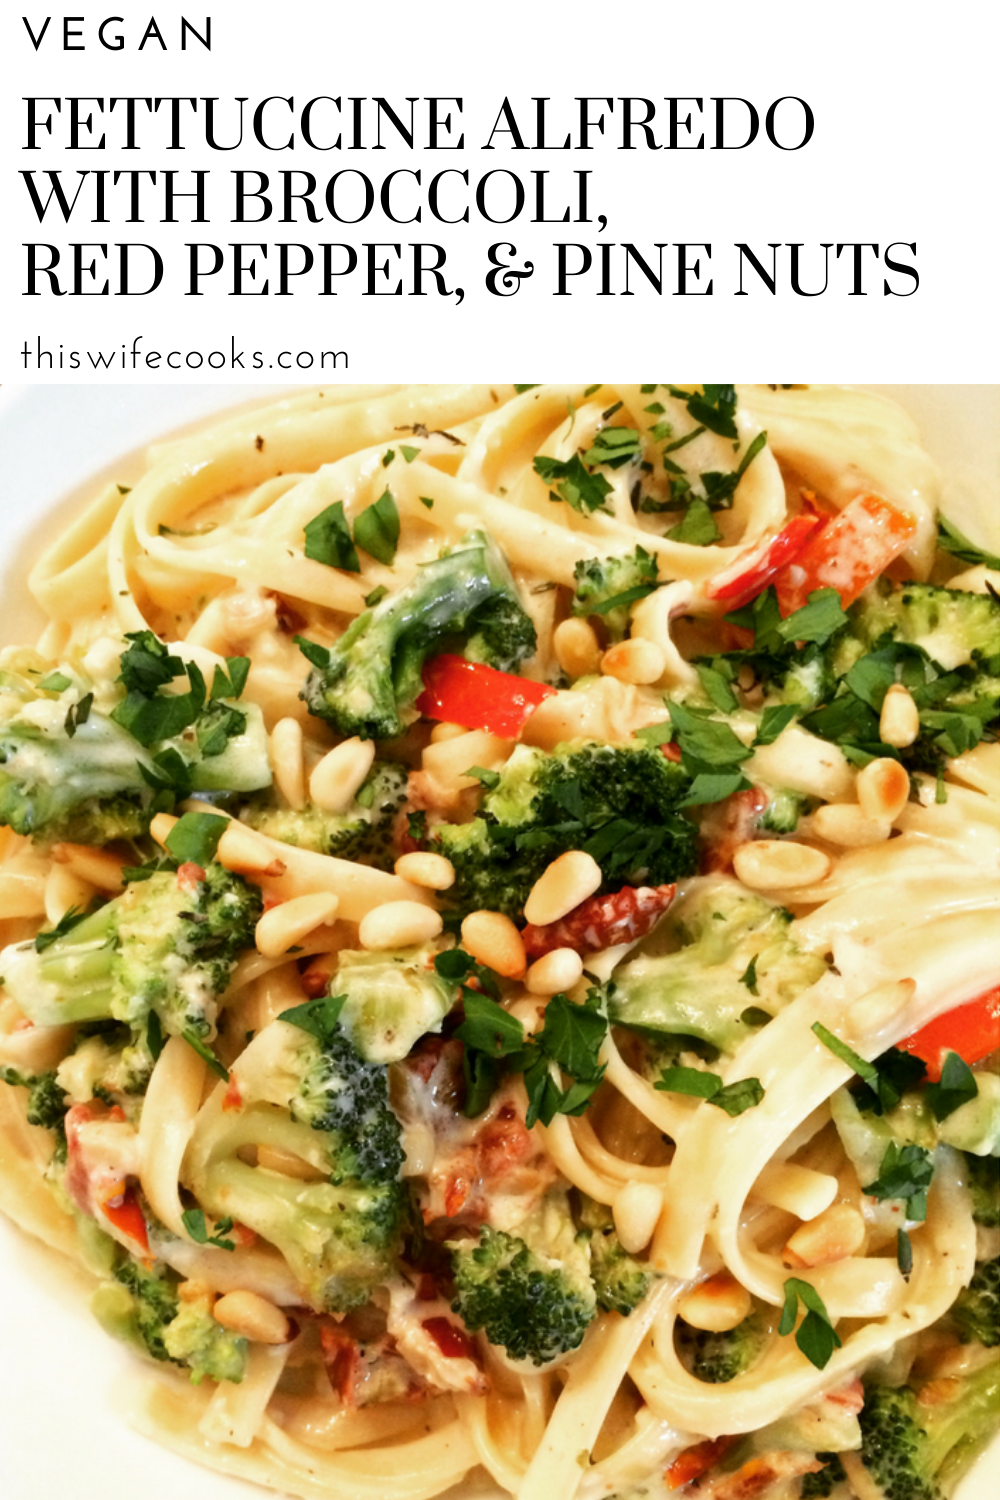 Fettuccine Alfredo with Broccoli, Red Peppers, & Pine Nuts - A colorful and nutritious vegan Alfredo pasta. Reasy to serve in about 30-40 minutes. via @thiswifecooks